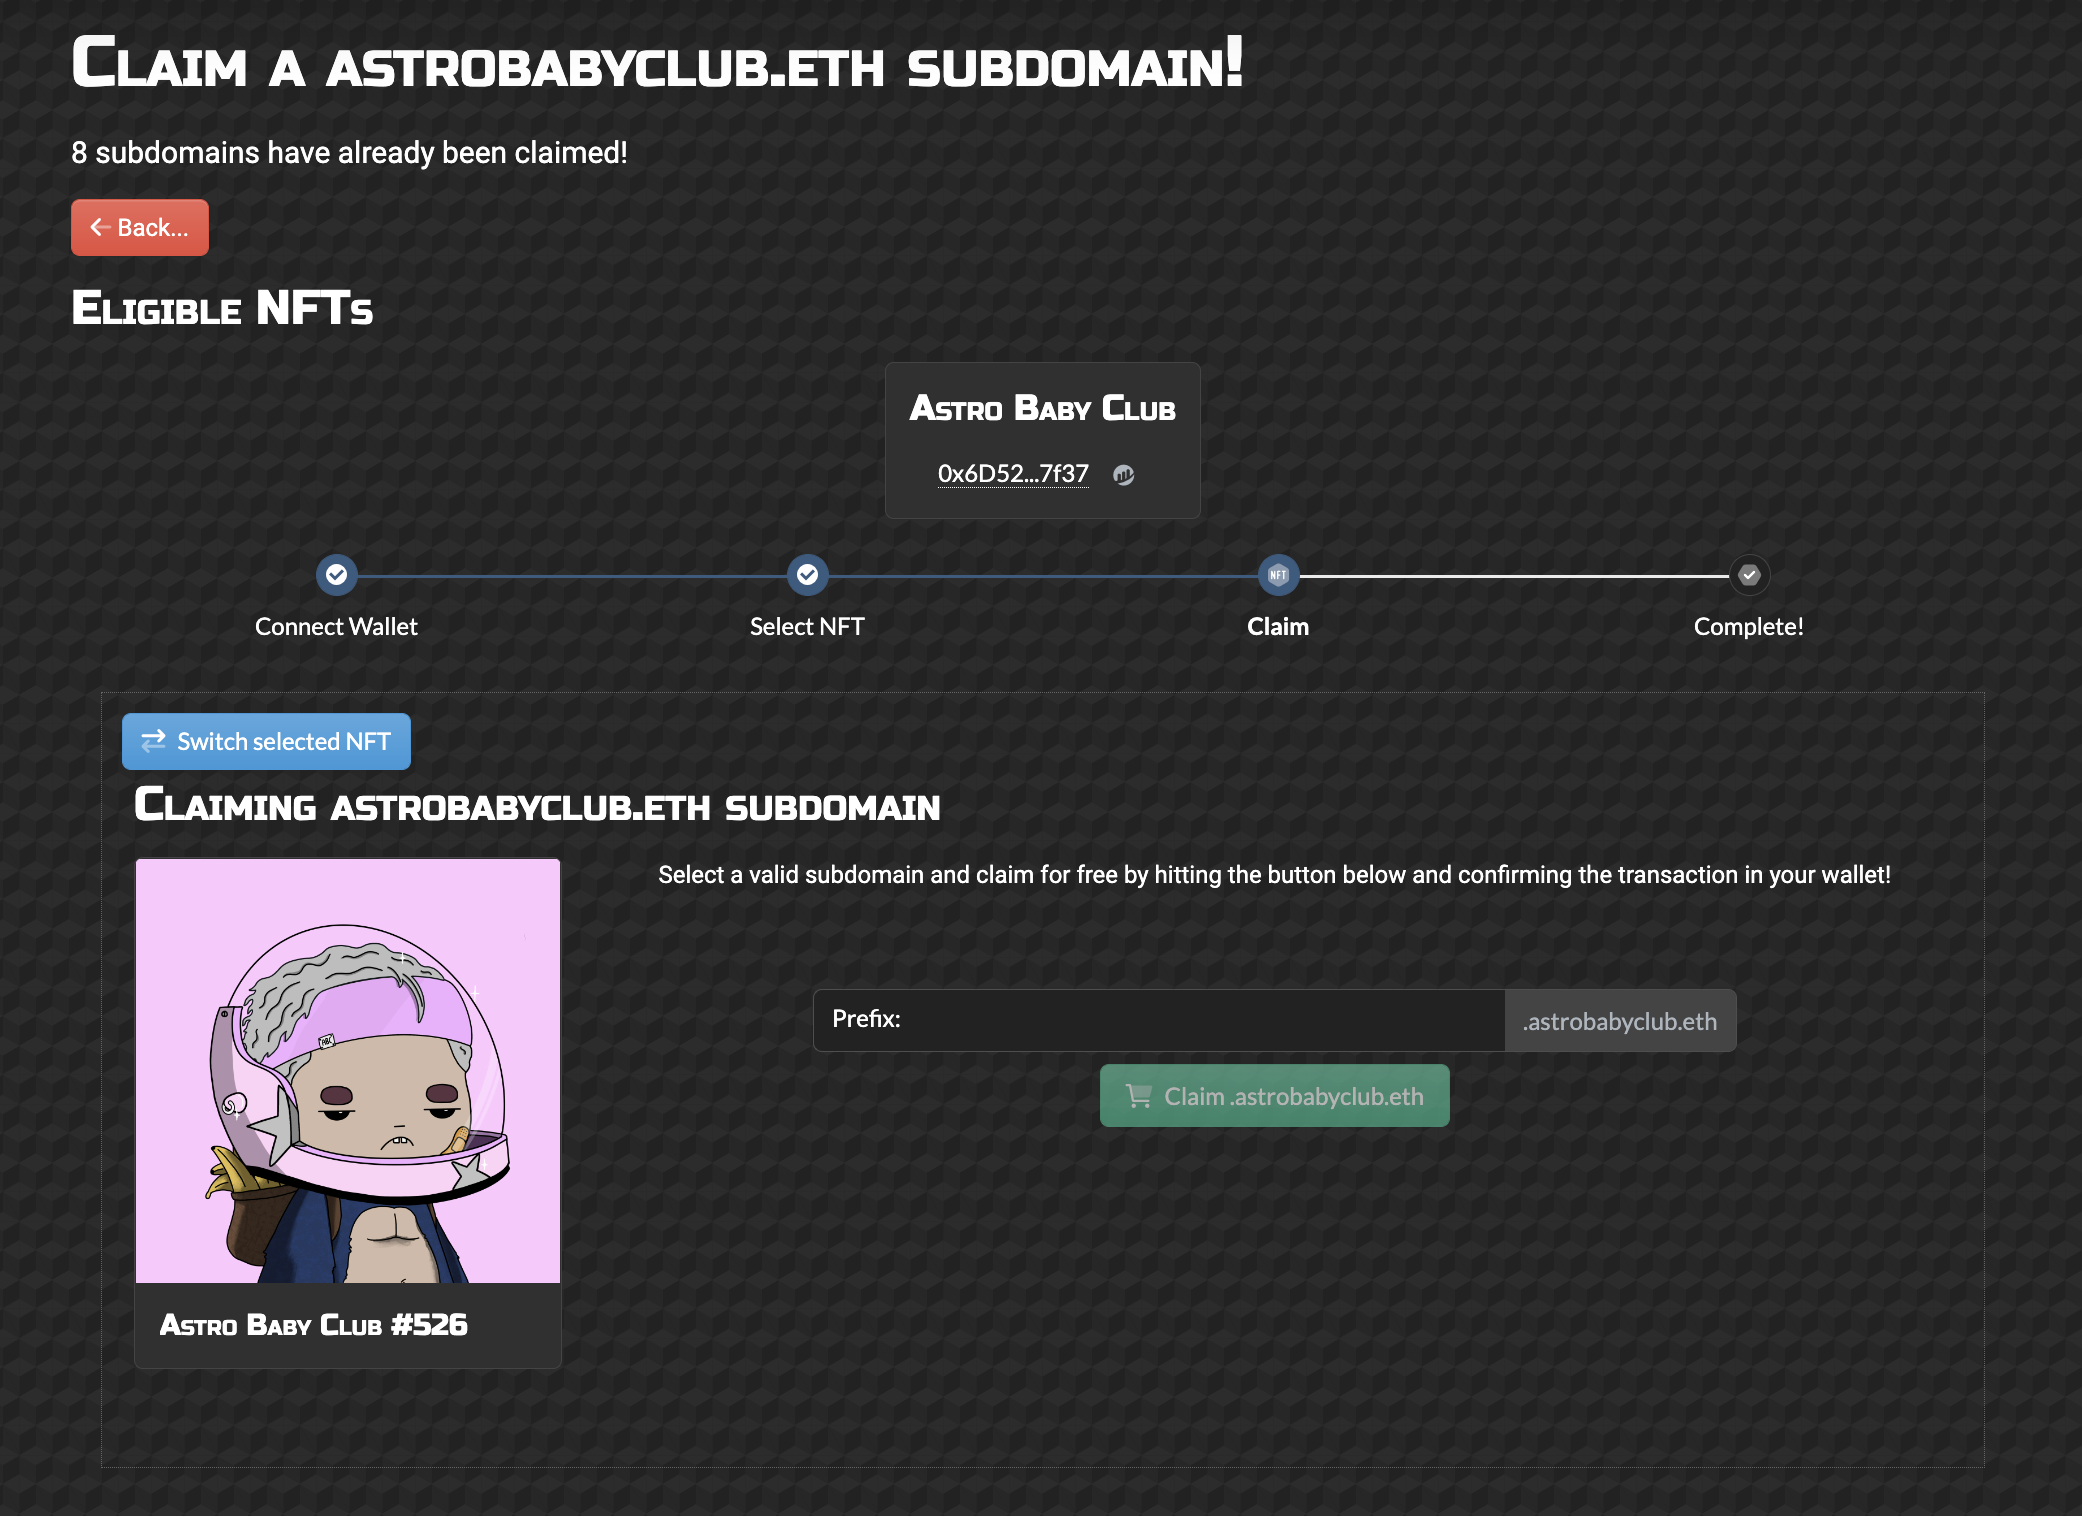 Enter the ENS prefix you'd like. It will appear as YourNameHere.astrobabyclub.eth